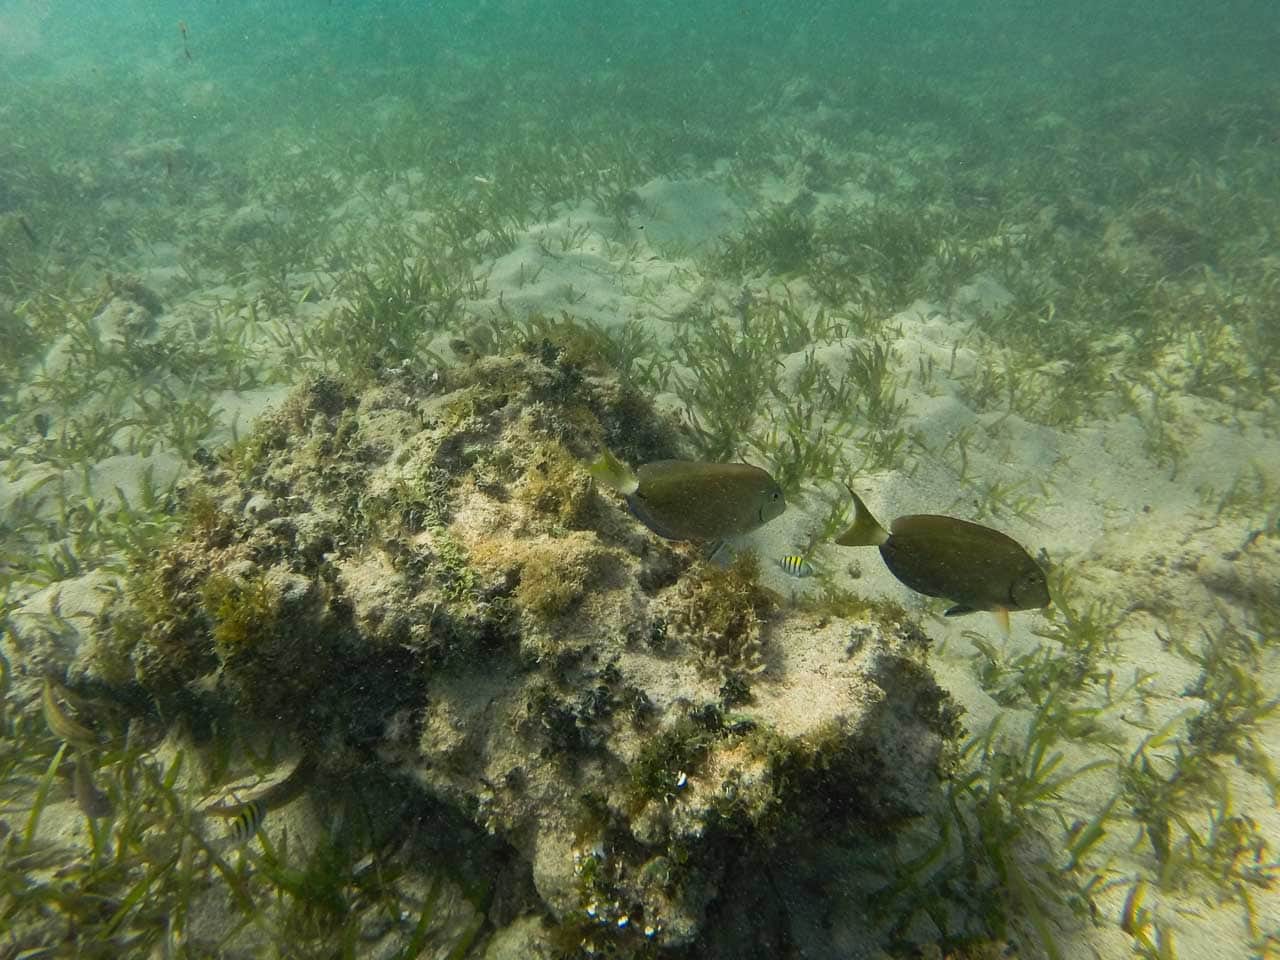 Tropical fish in seagrass beds in Reef Bay, Virgin Islands National Park, St. John